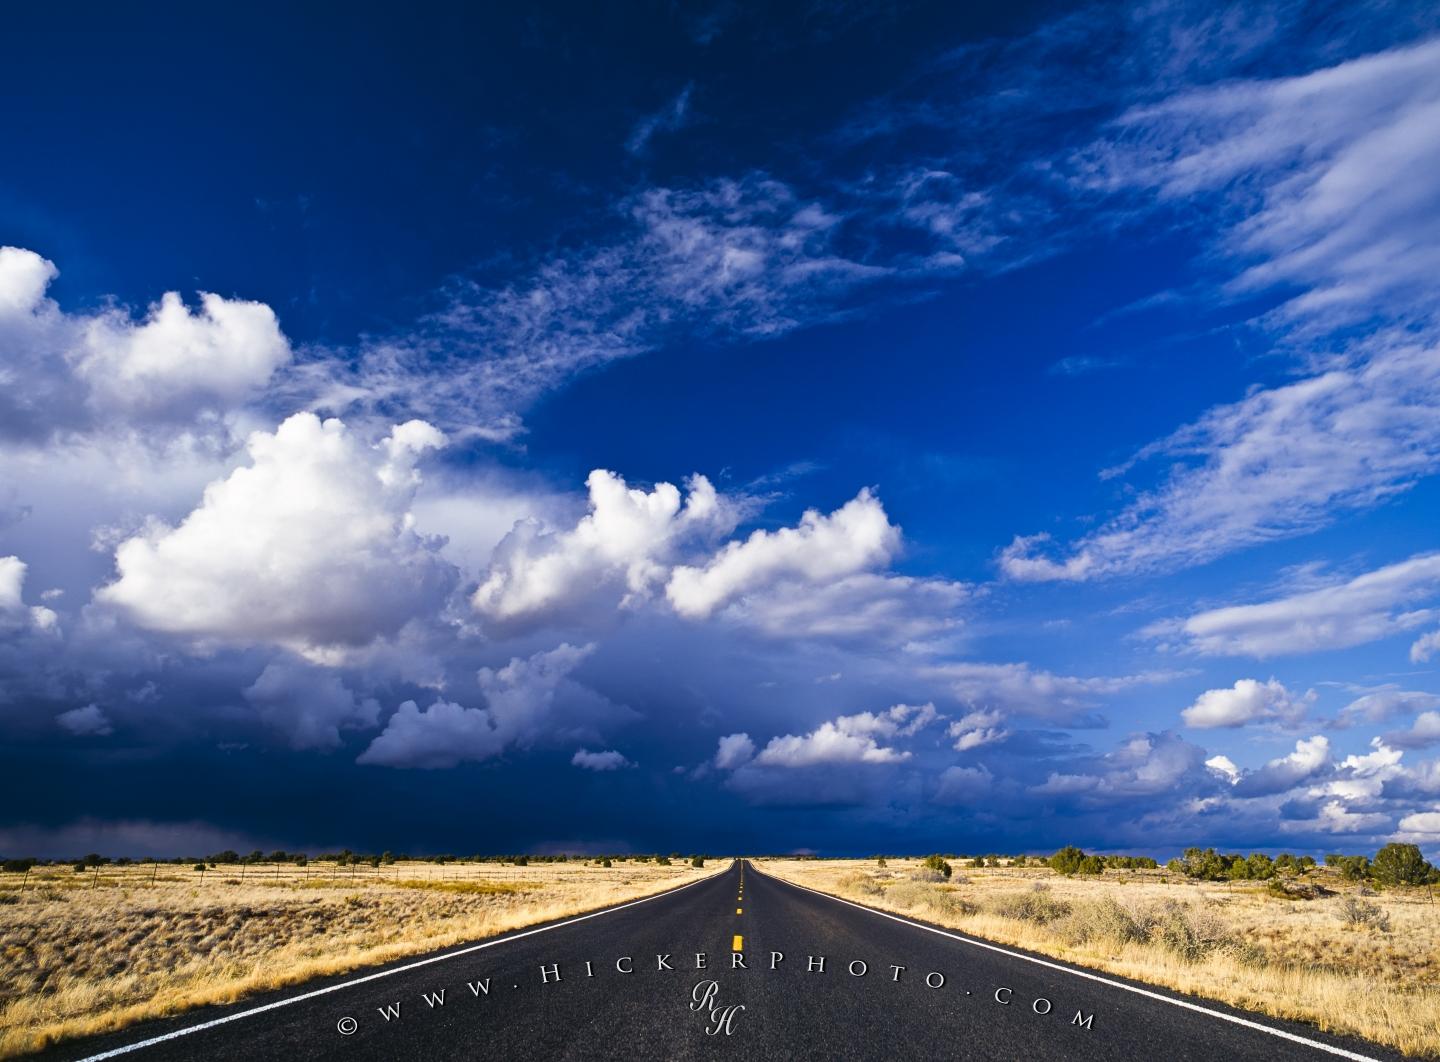 Free wallpaper background Endless Desert Road Storm Clouds New Mexico